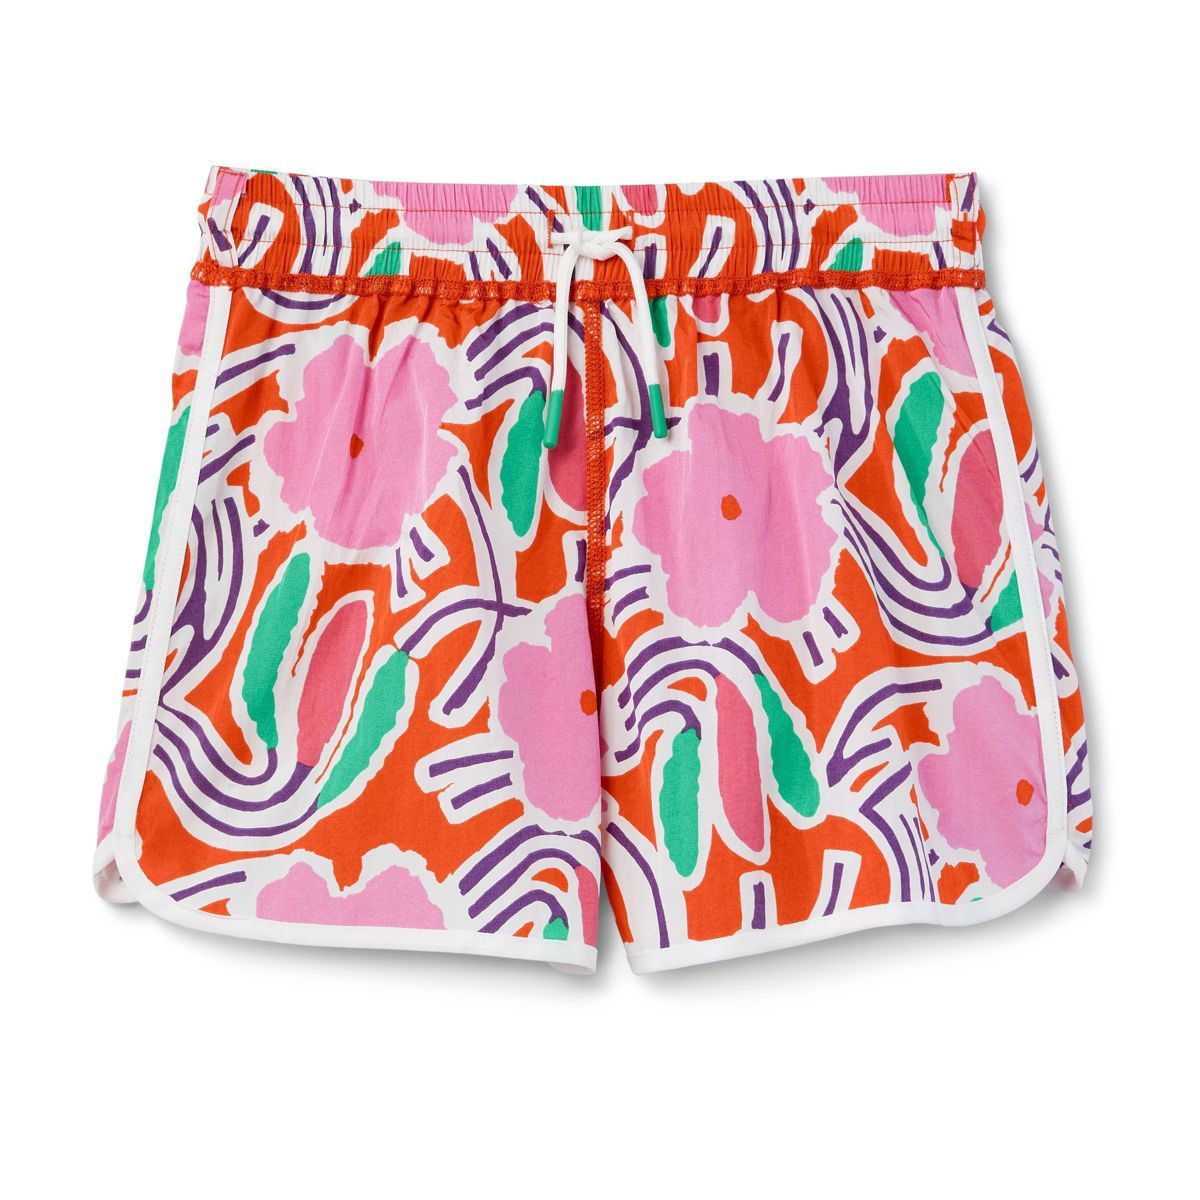 Kids' Adaptive Flower Groove Red Shorts - DVF for Target | Target